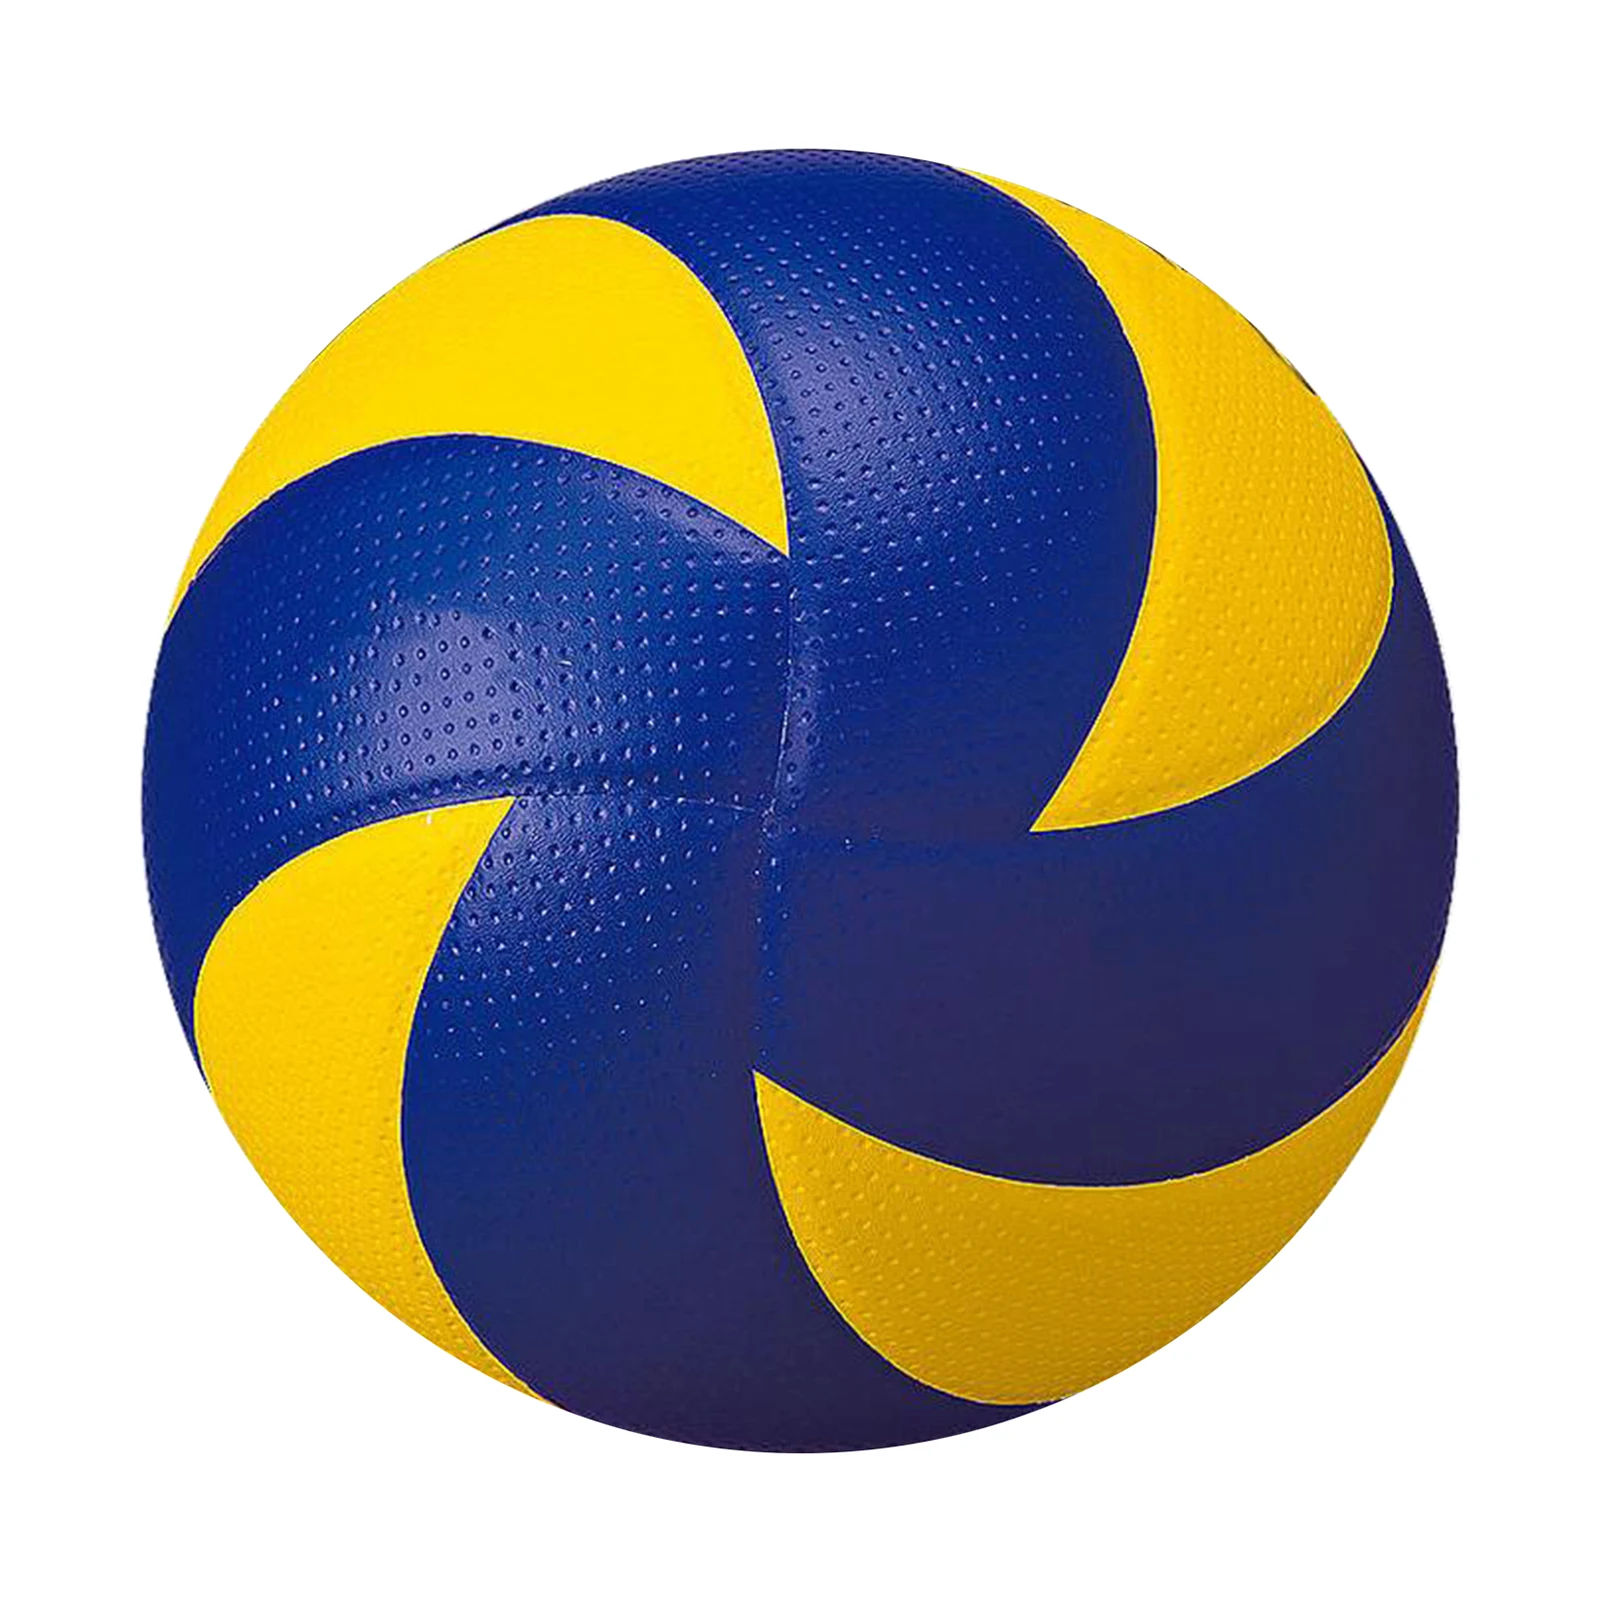 AWFAND Soft Play Volleyball Ball Beach Game Training Size 5 for Outdoor Indoor Durable 